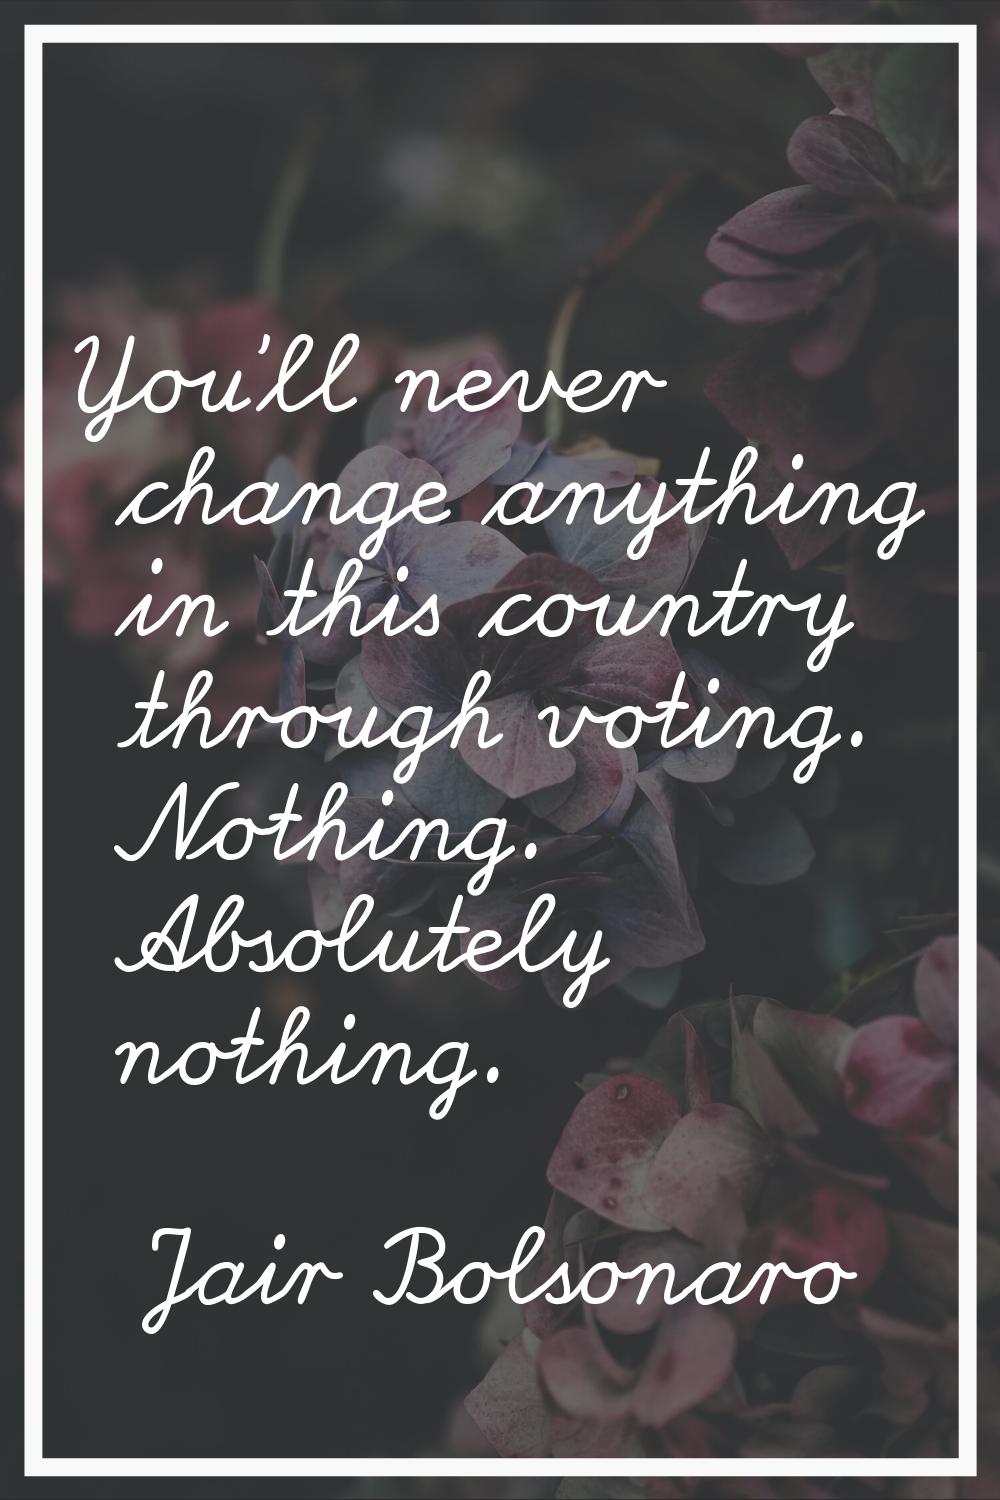 You'll never change anything in this country through voting. Nothing. Absolutely nothing.